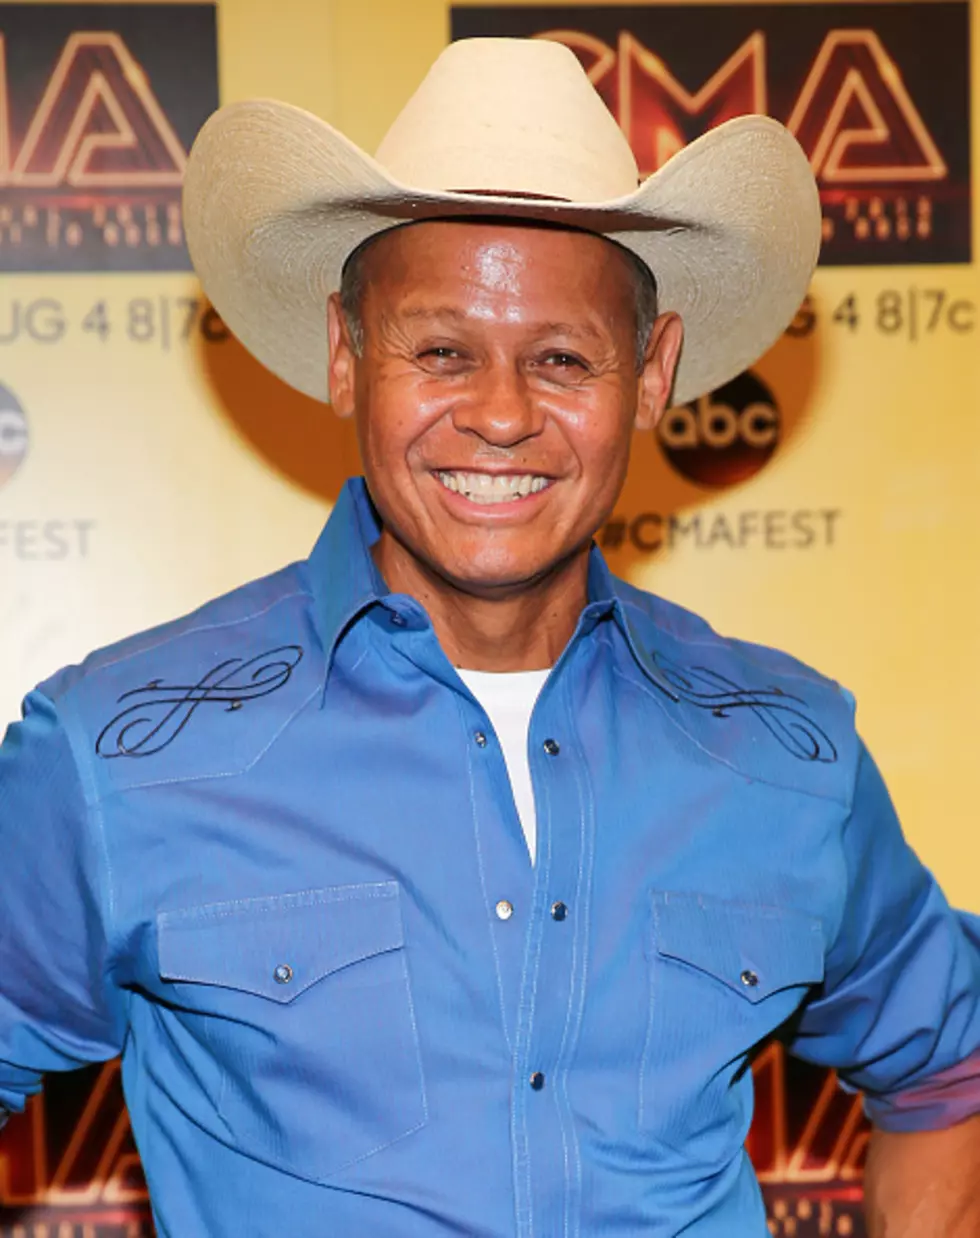  Save 50 percent on your tickets to see Neal McCoy 